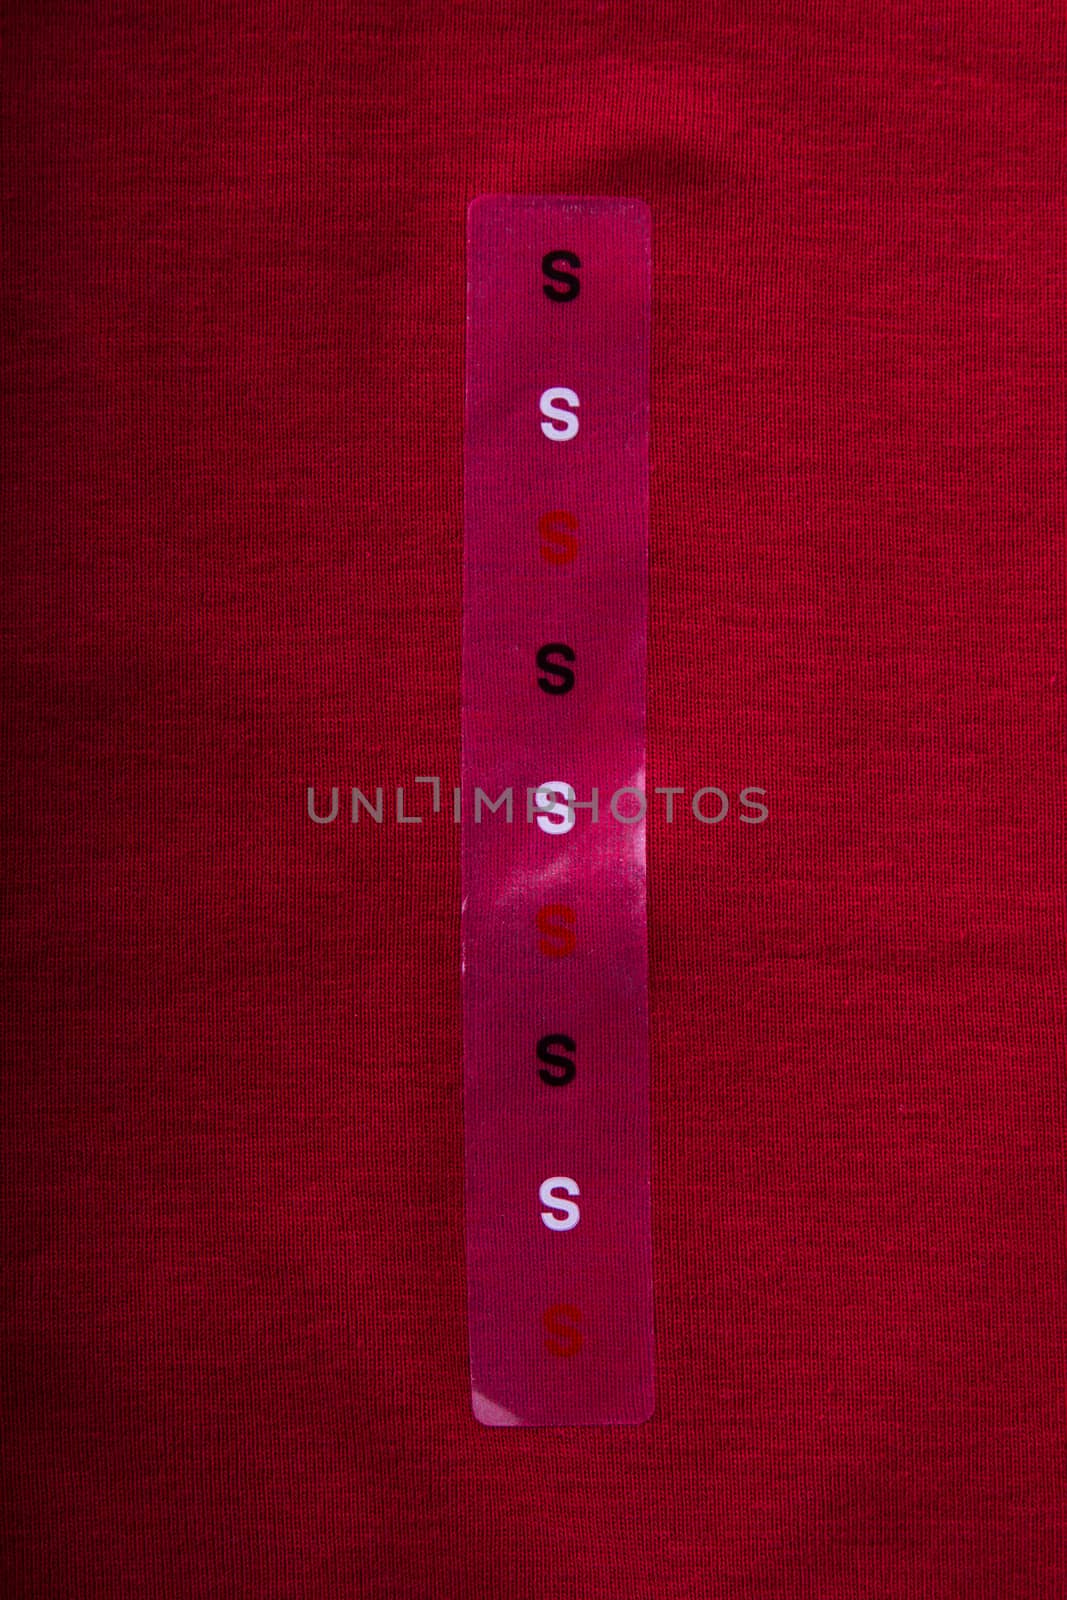 Label size S on red cloth - Stock Image